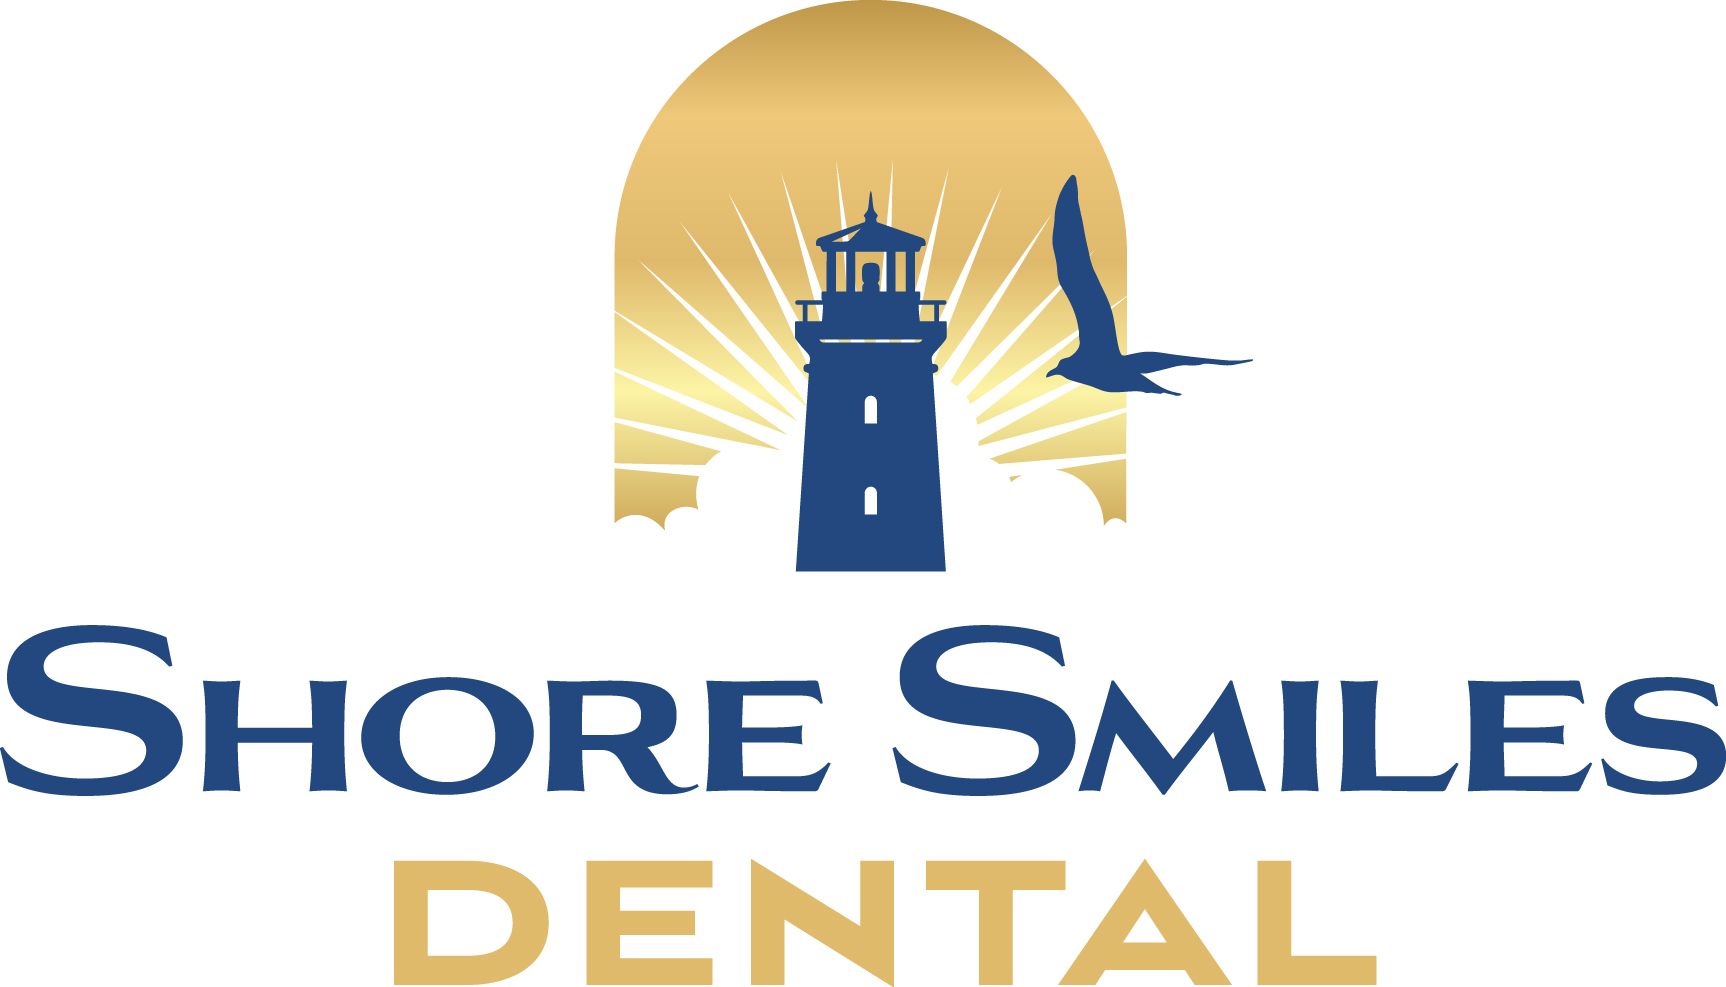 Linda Talks About Her Experience At Shore Smile Dental : Shore Smiles Dental, P.C.